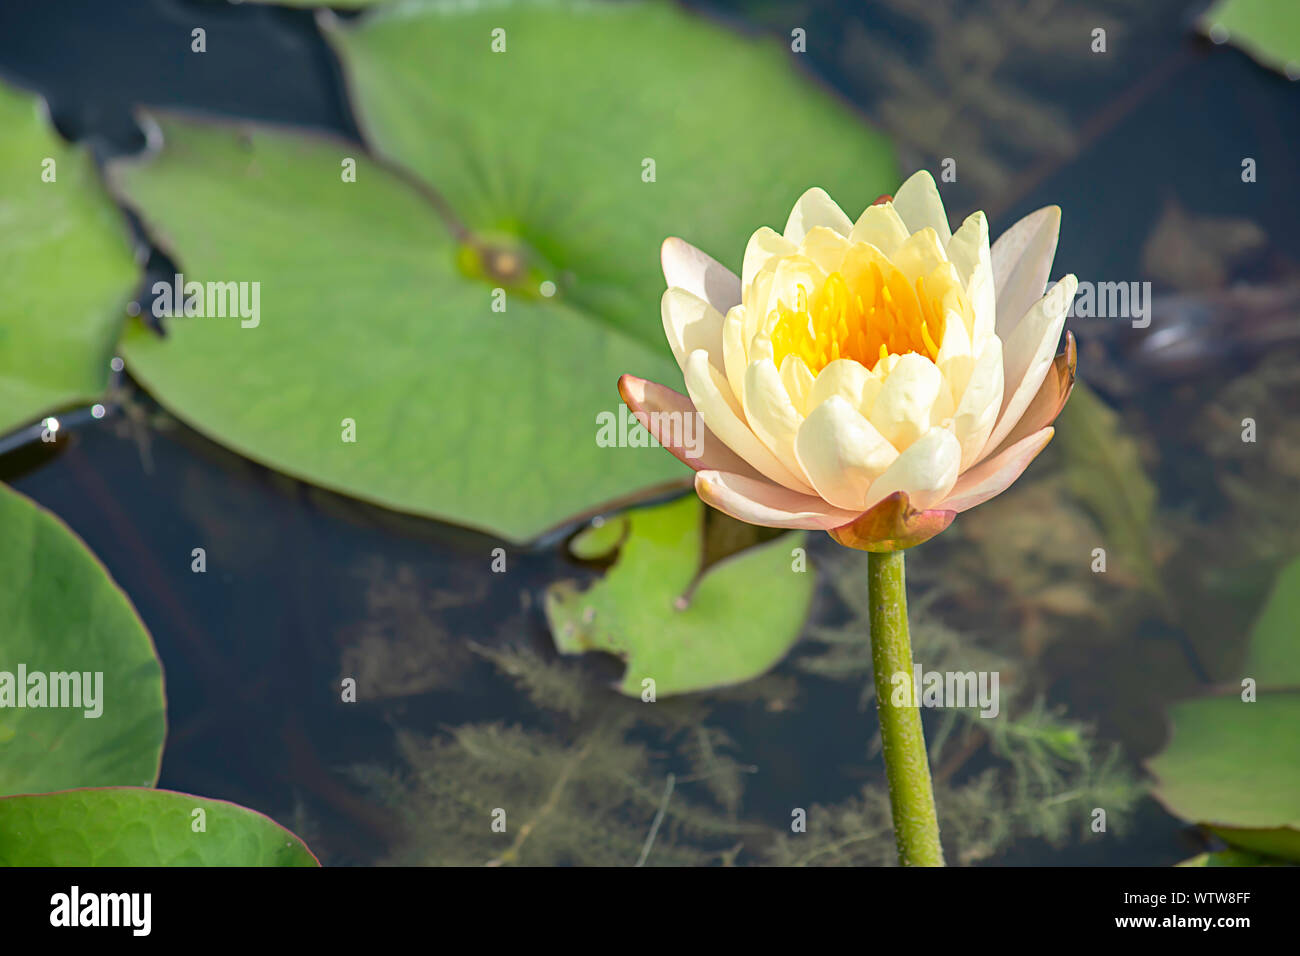 The beauty of the White Lotus Bloom in ponds Stock Photo